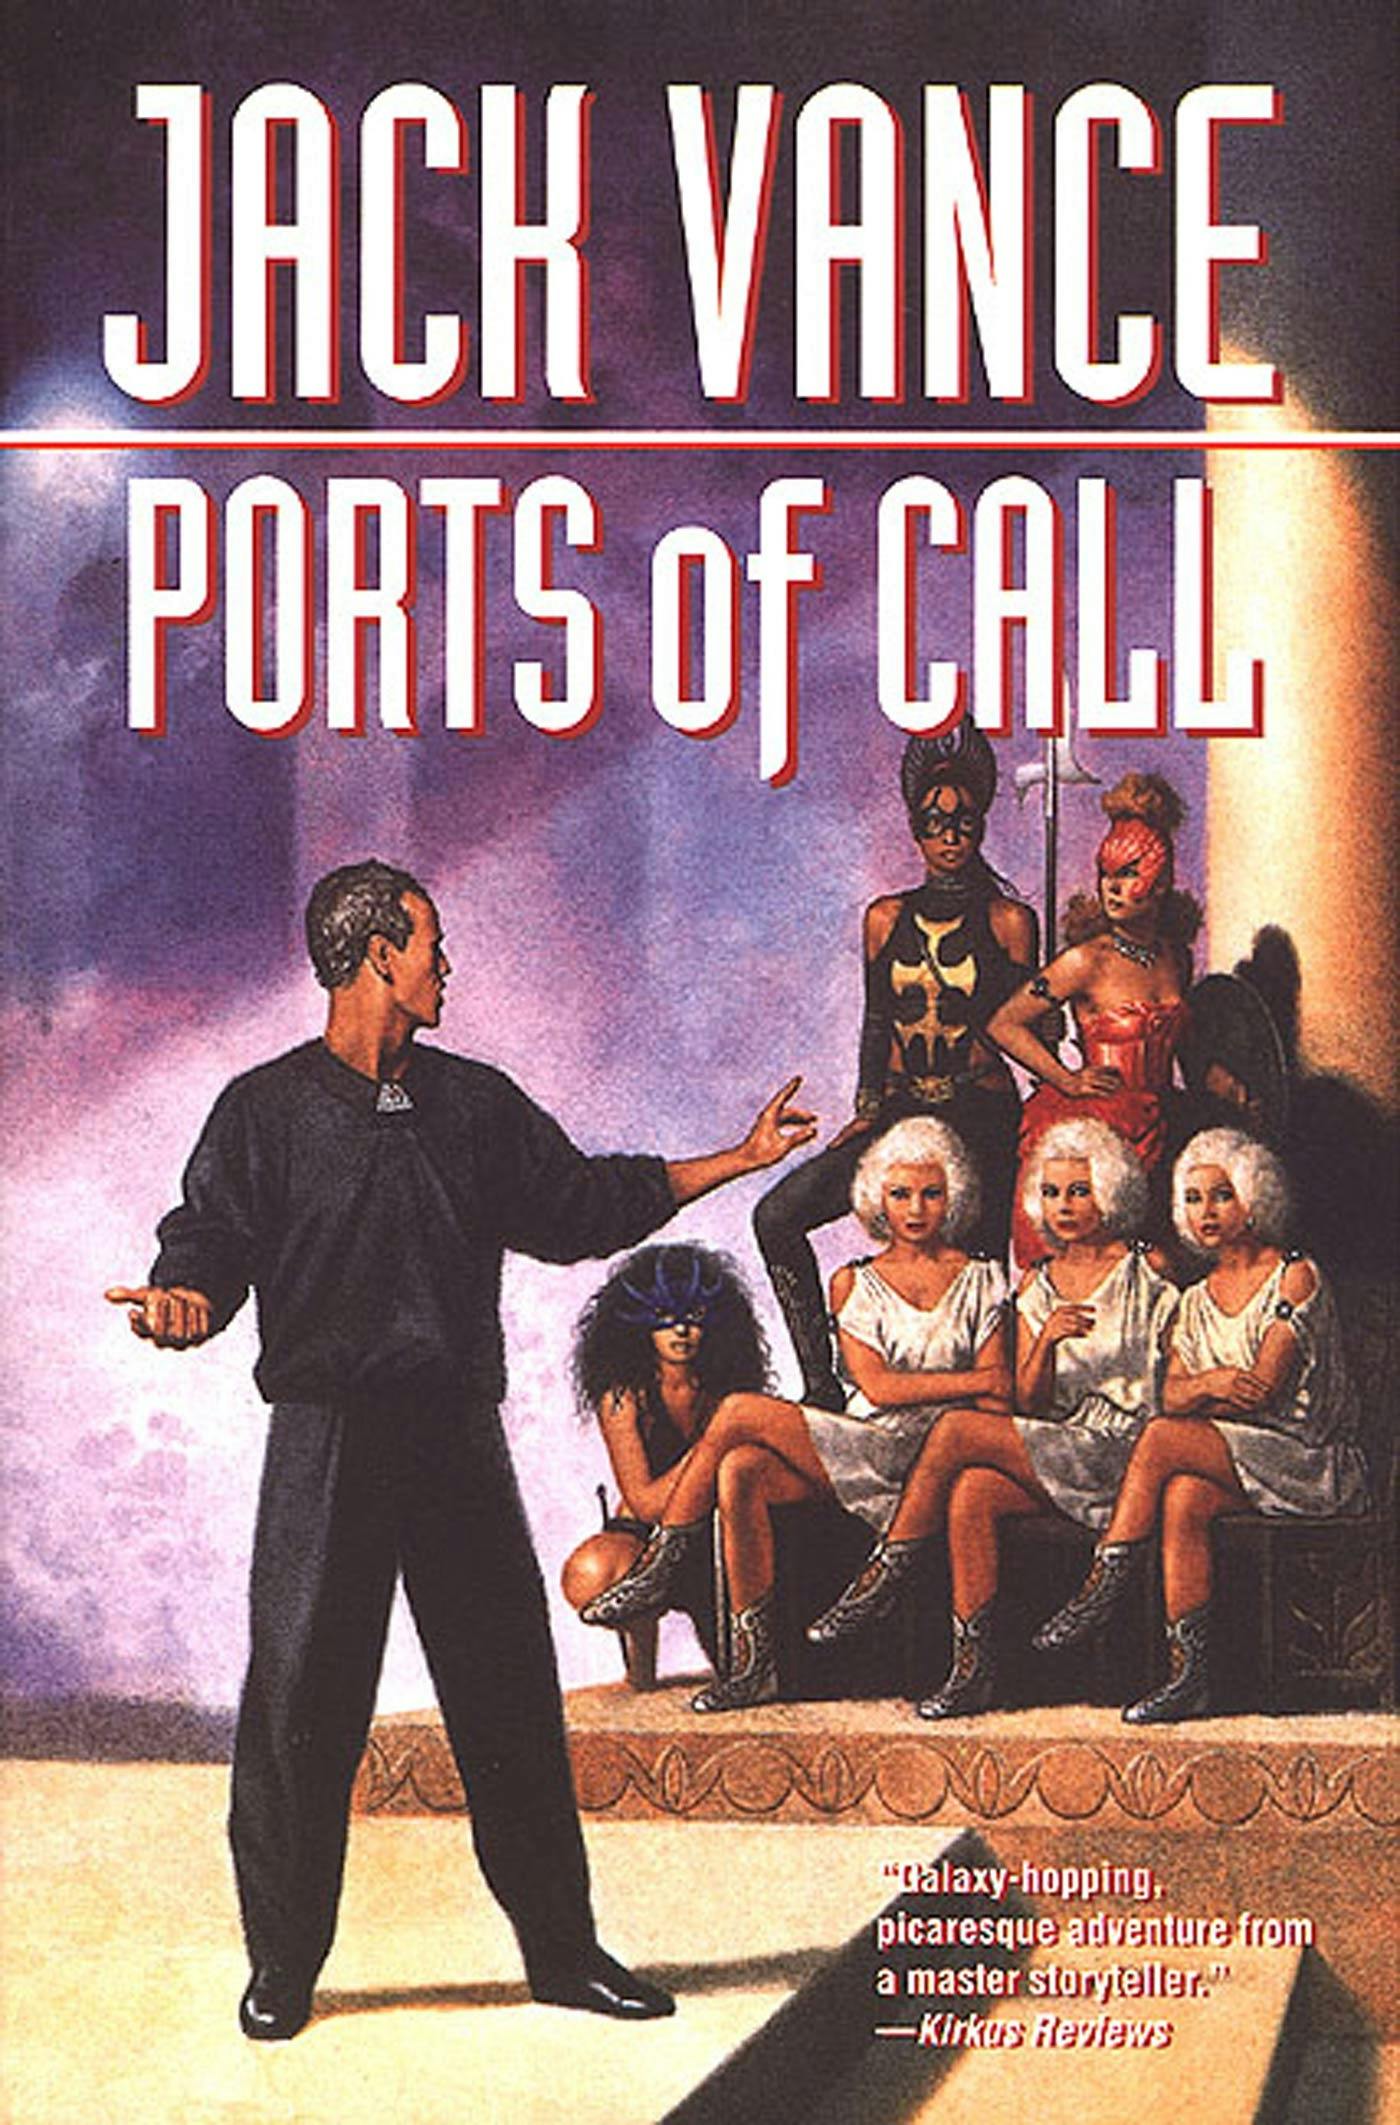 Cover for the book titled as: Ports of Call